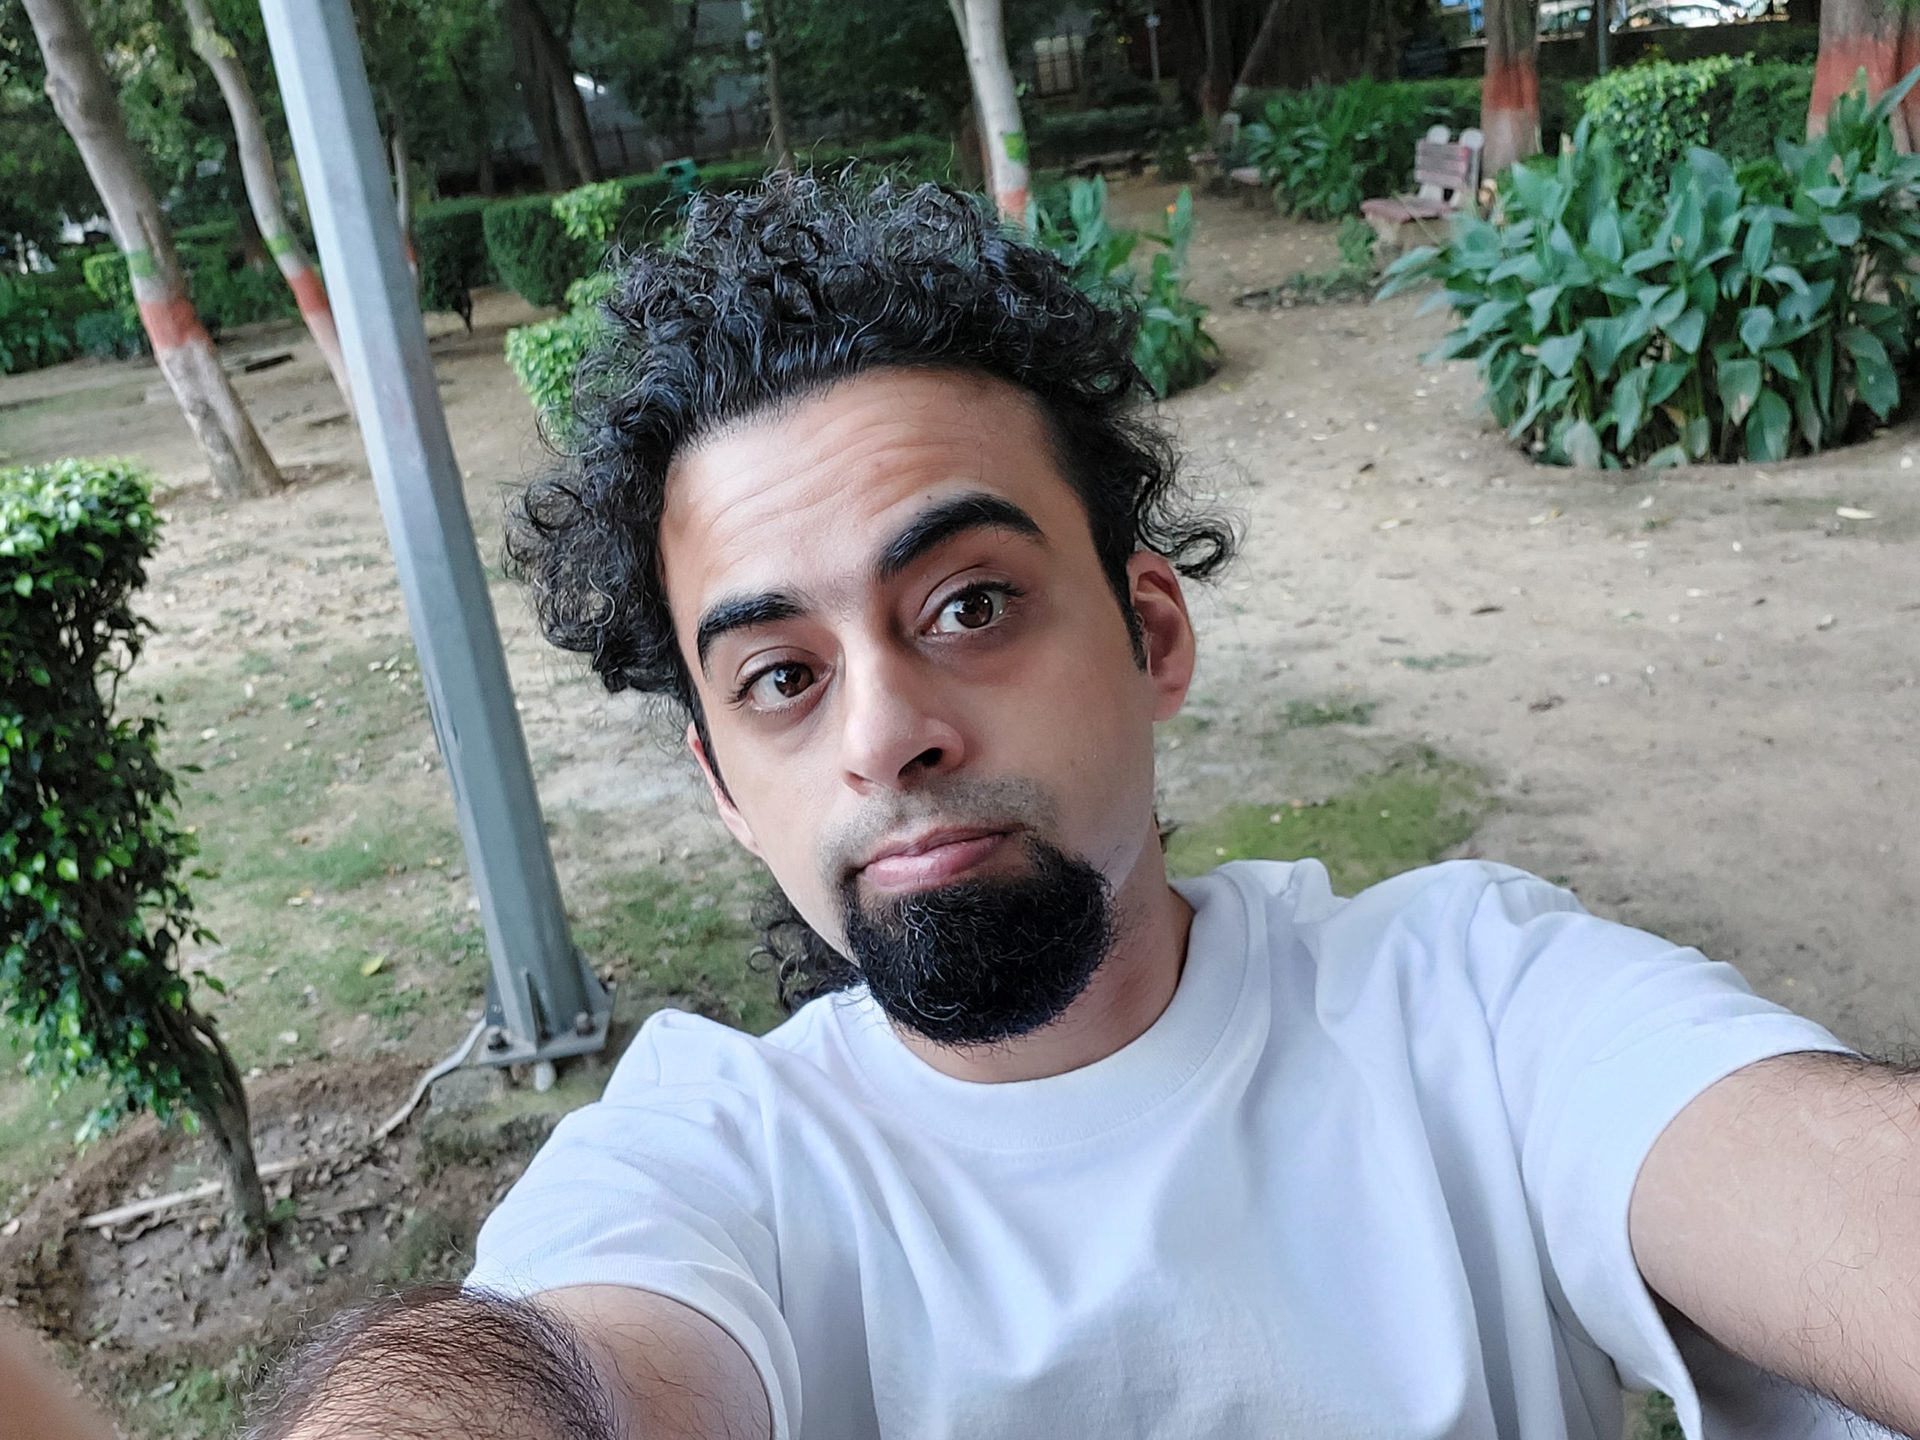 Samsung Galaxy M52 camera sample selfie normal of a man with dark curly hair and a beard wearing a white t-shirt outdoors